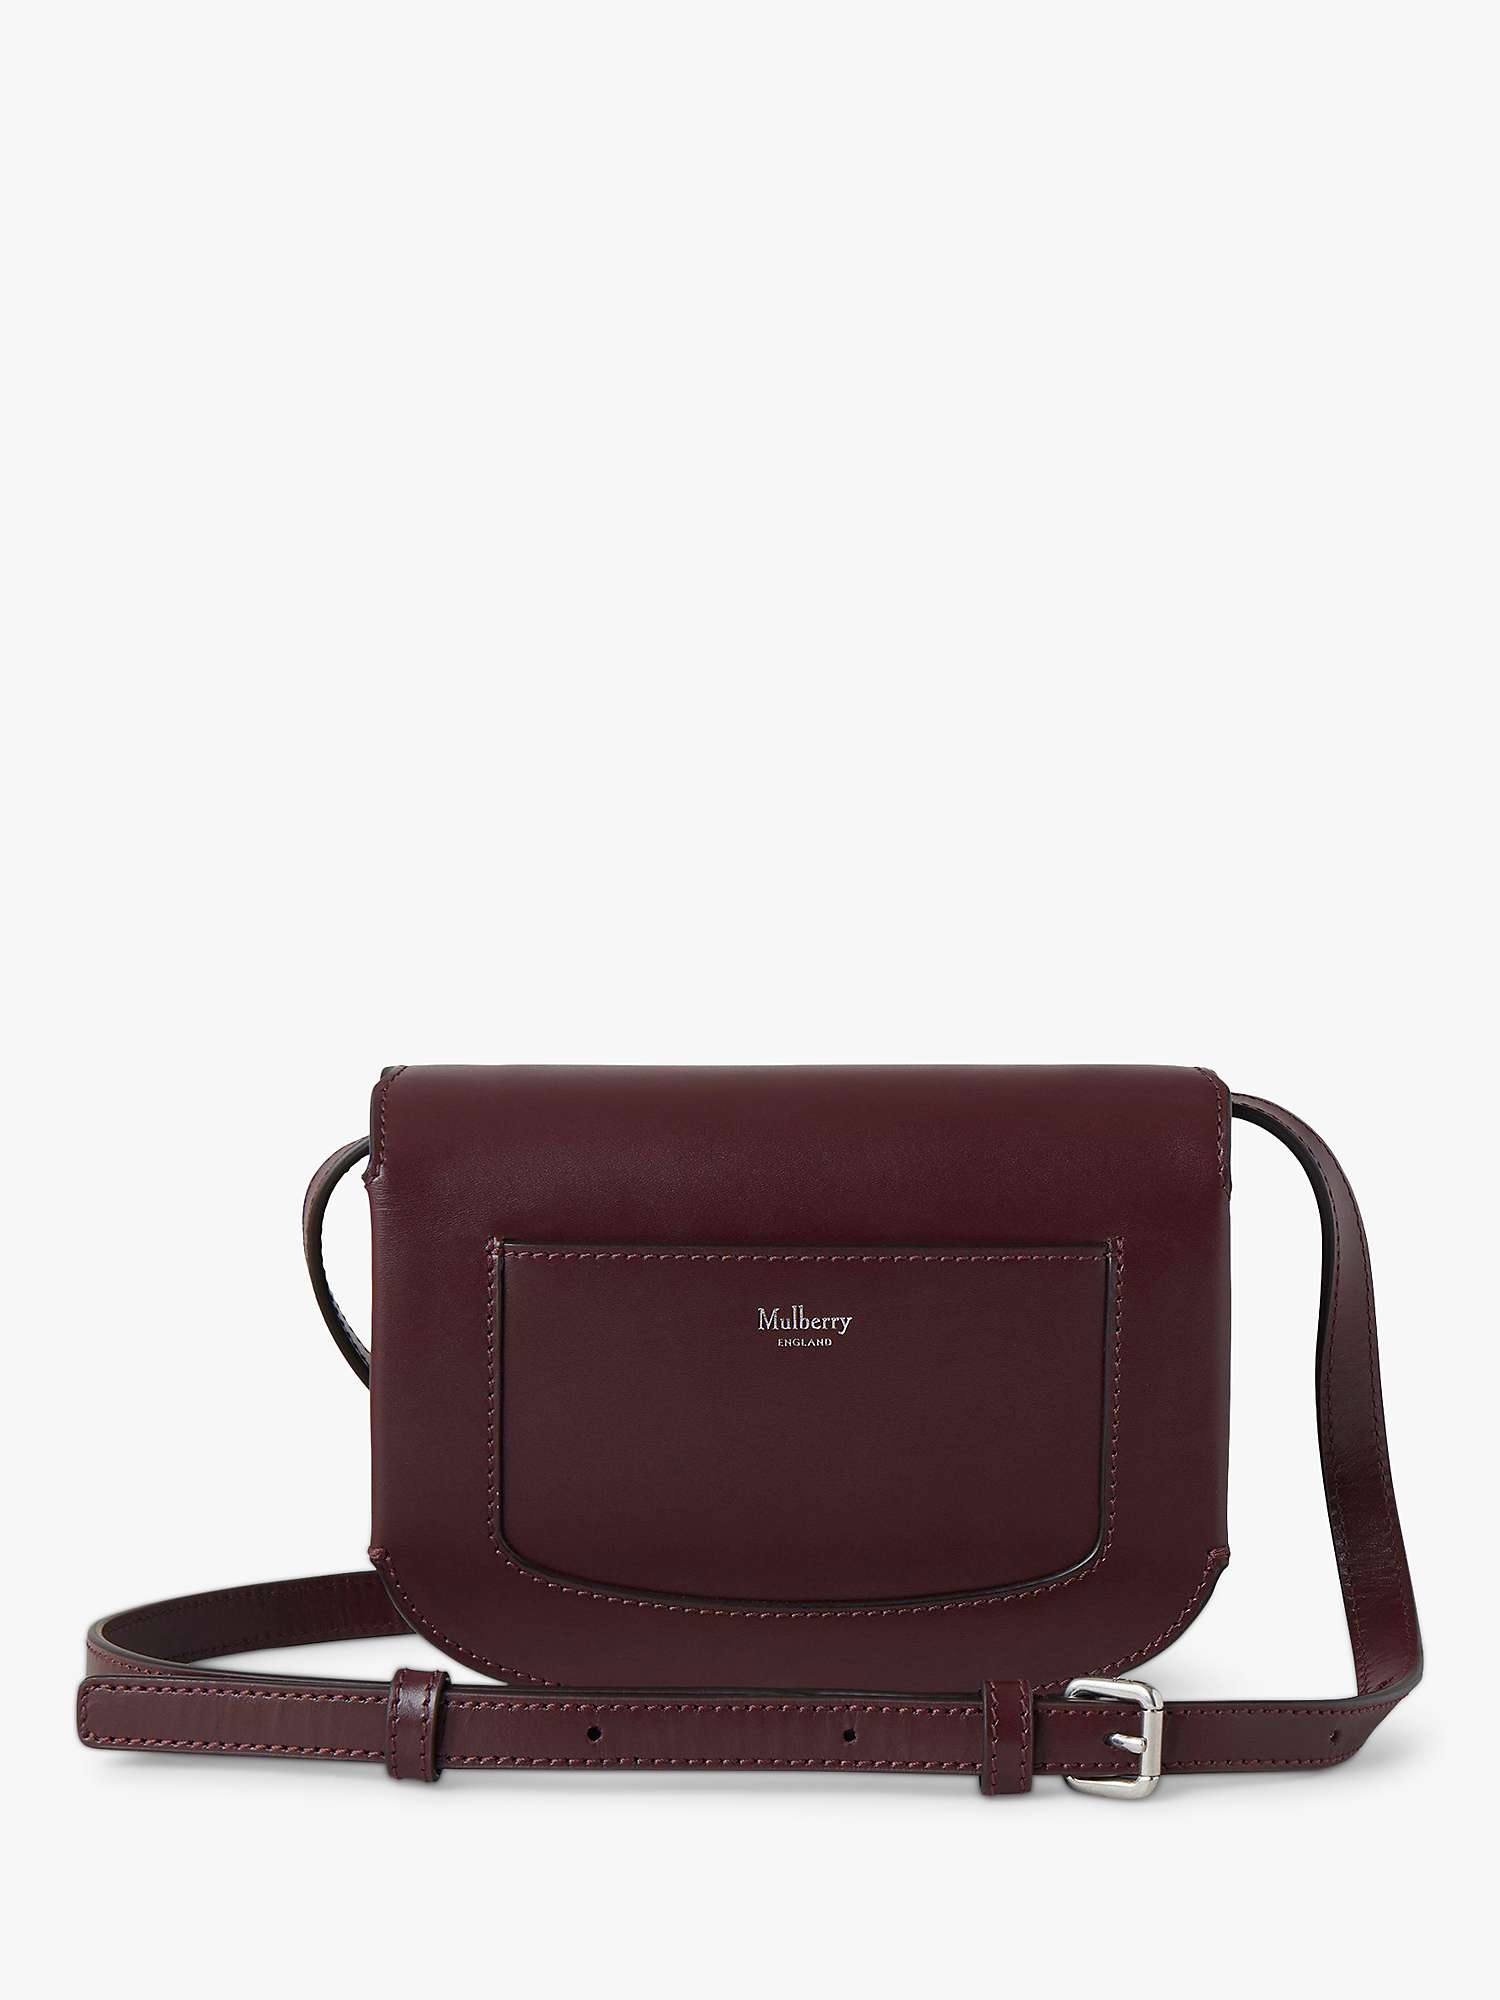 Buy Mulberry Small Pimlico Satchel, Black Cherry Online at johnlewis.com